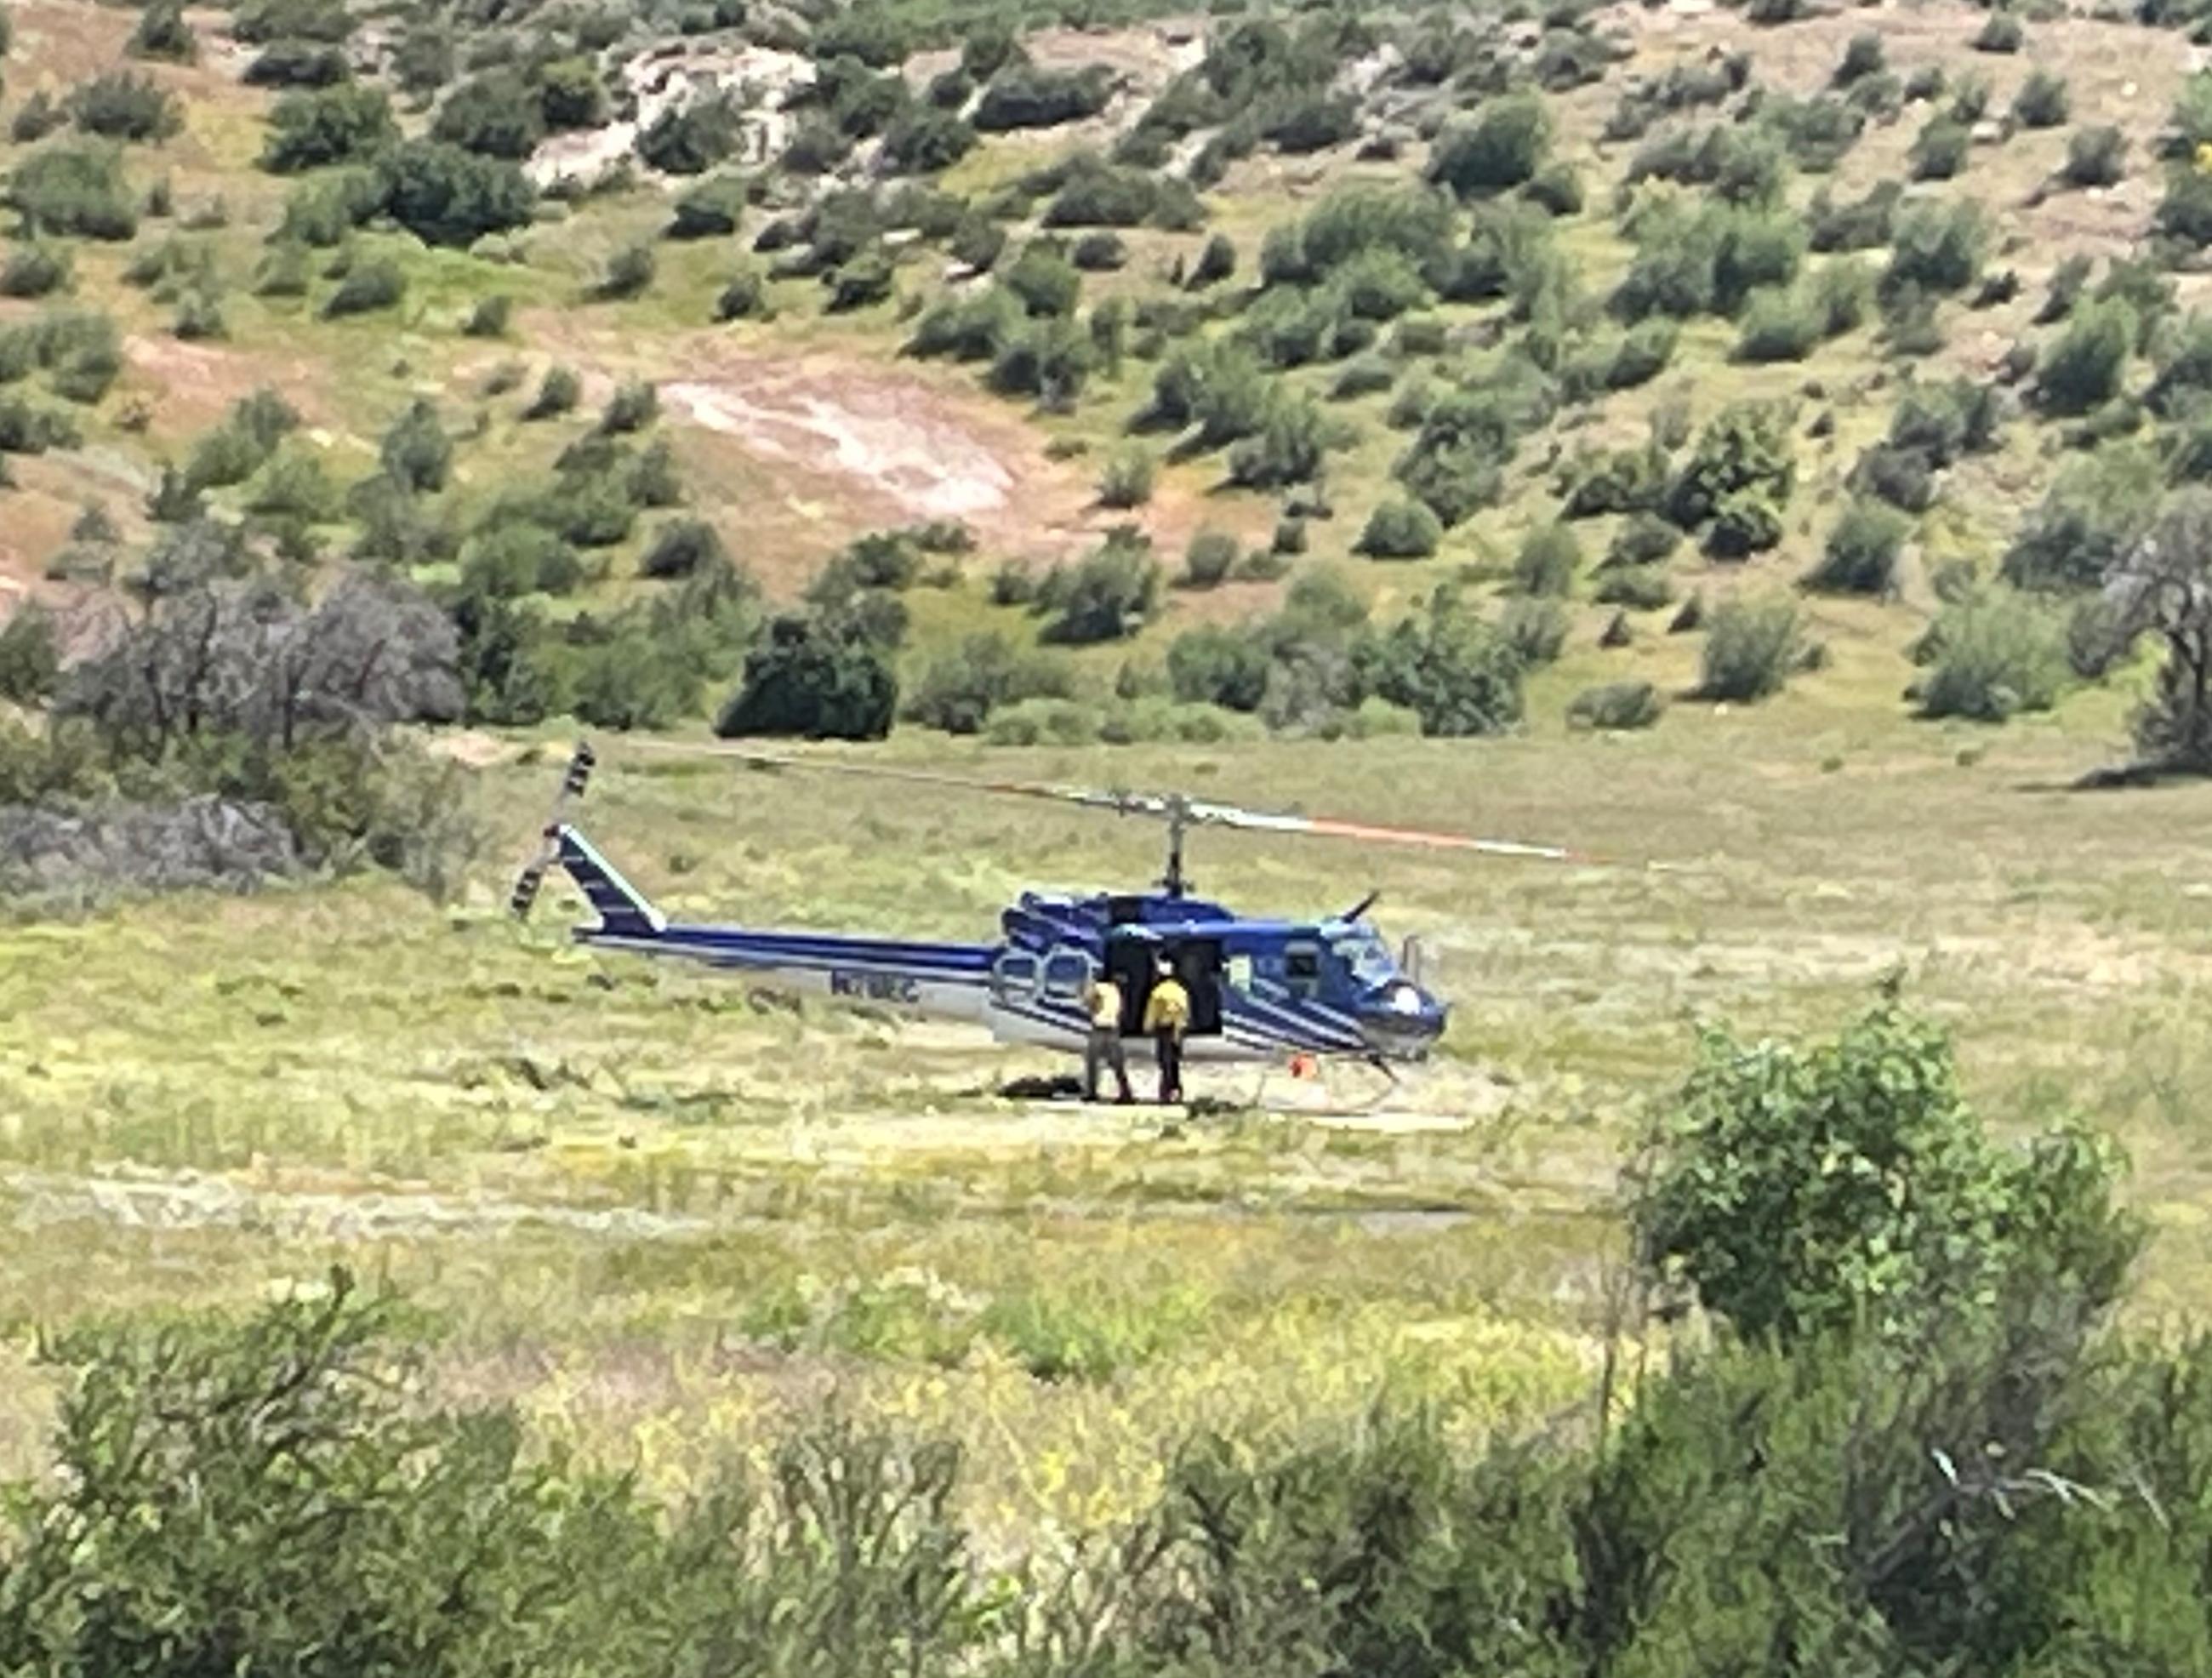 Helicopter in field being readied for flight.